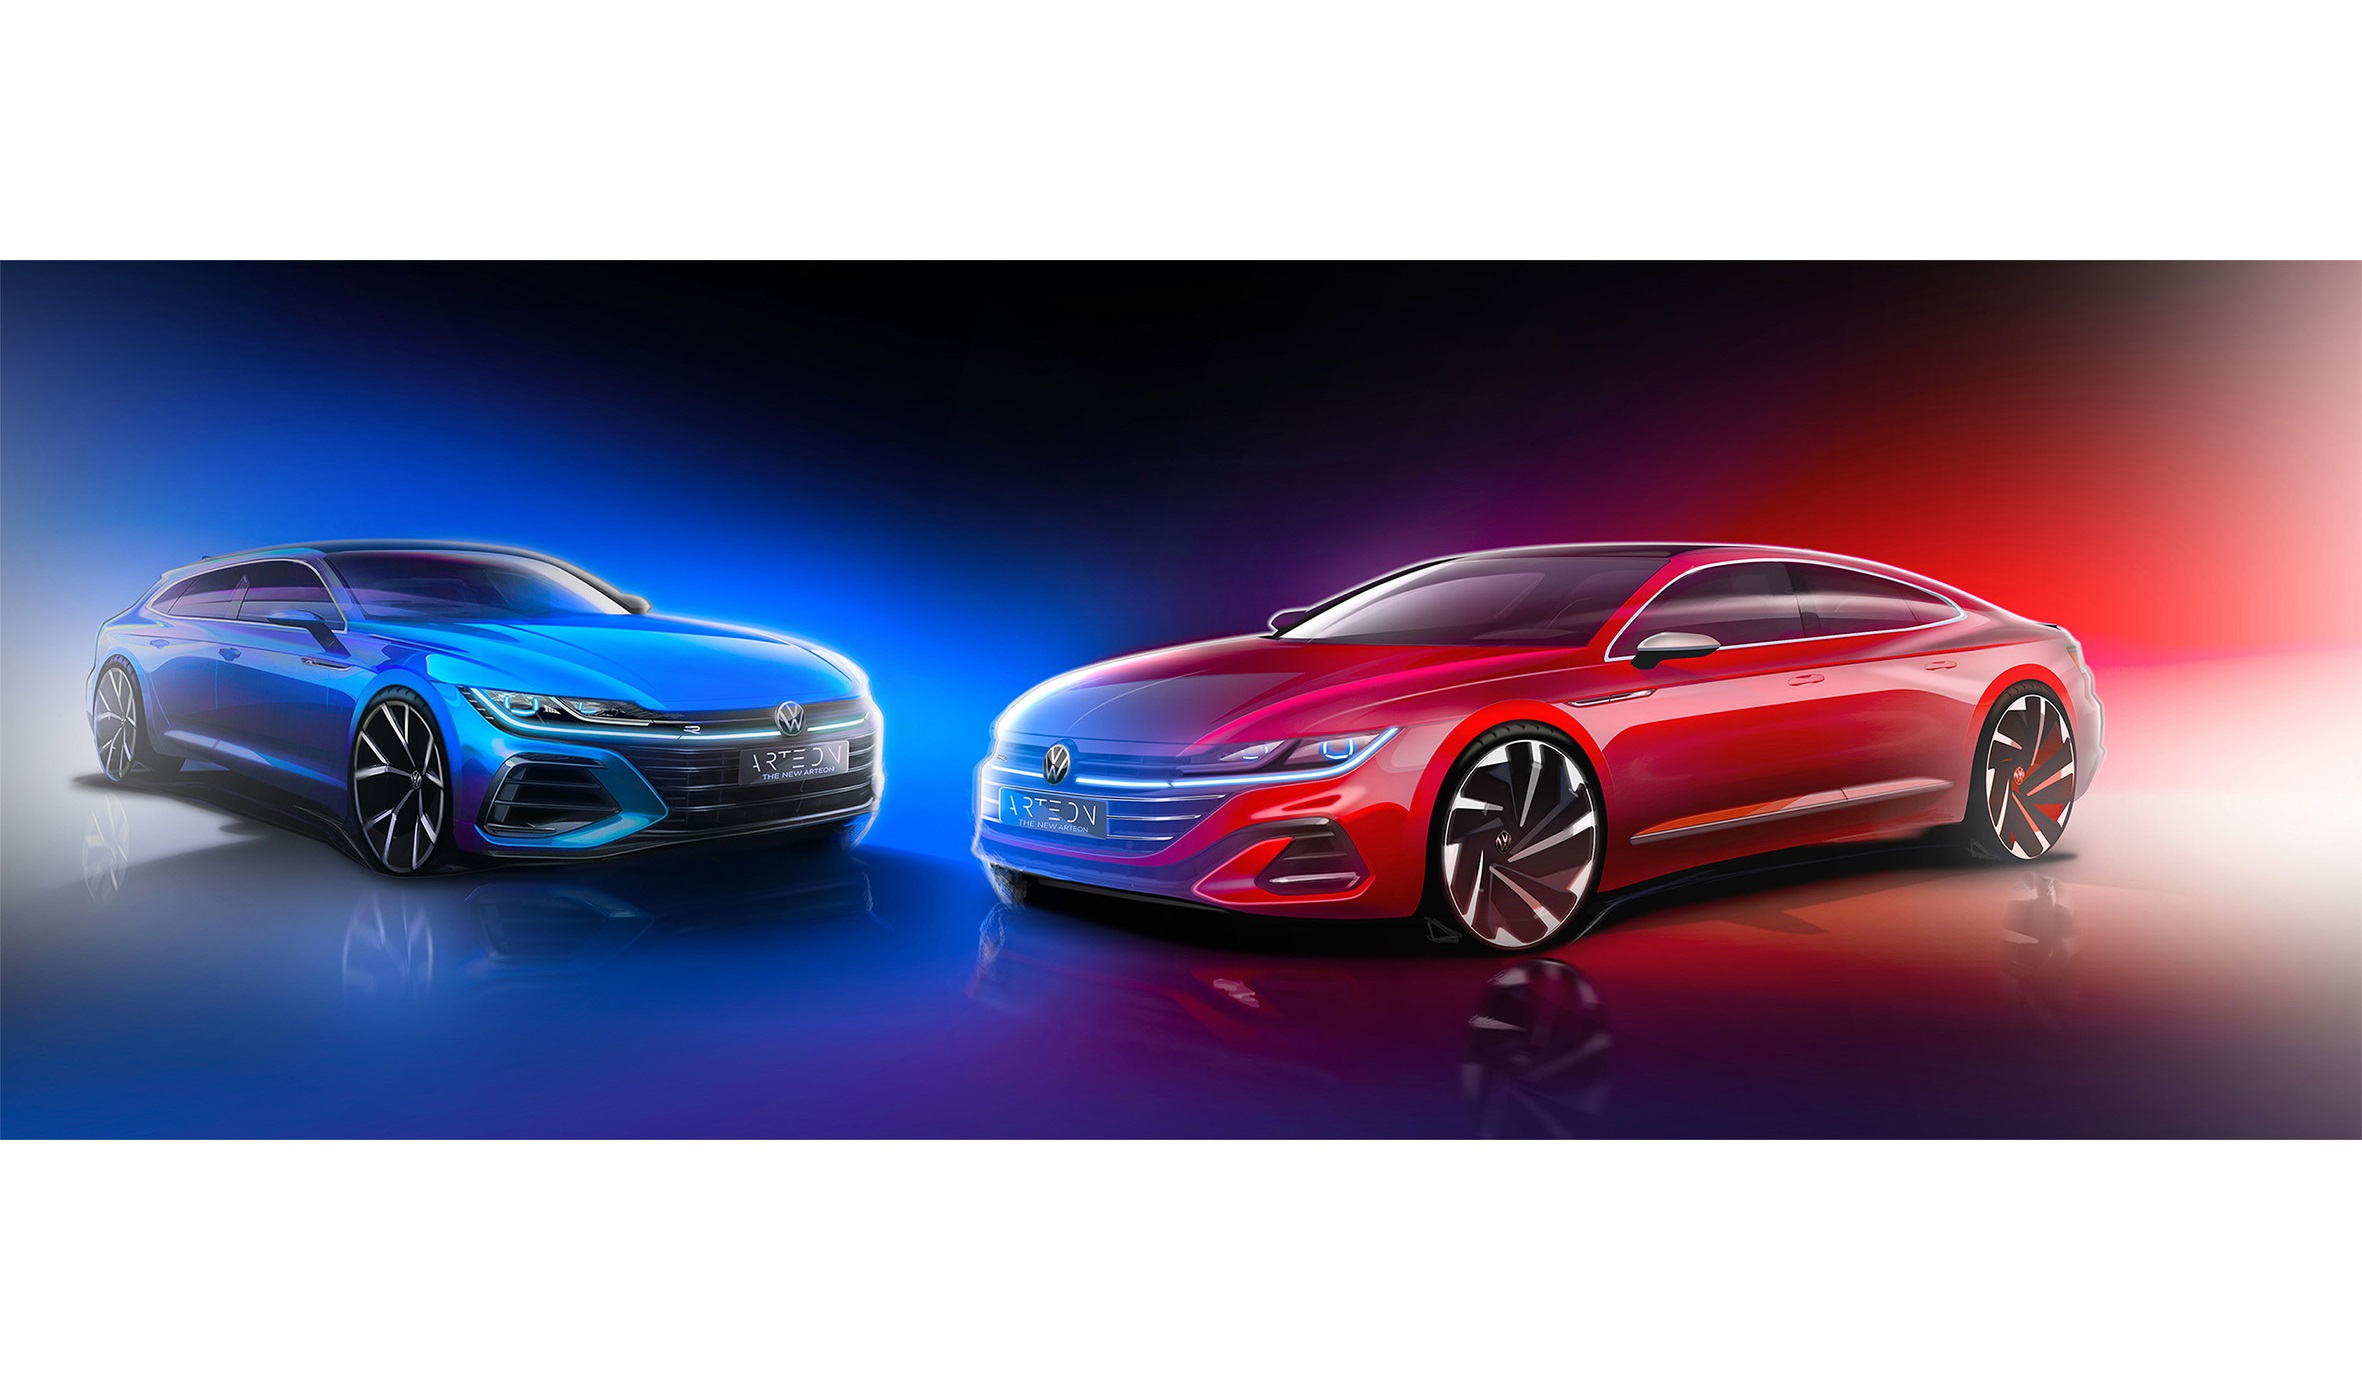 Volkswagen Teases 2021 Arteon Fastback and New Europe-Only Shooting Brake Models